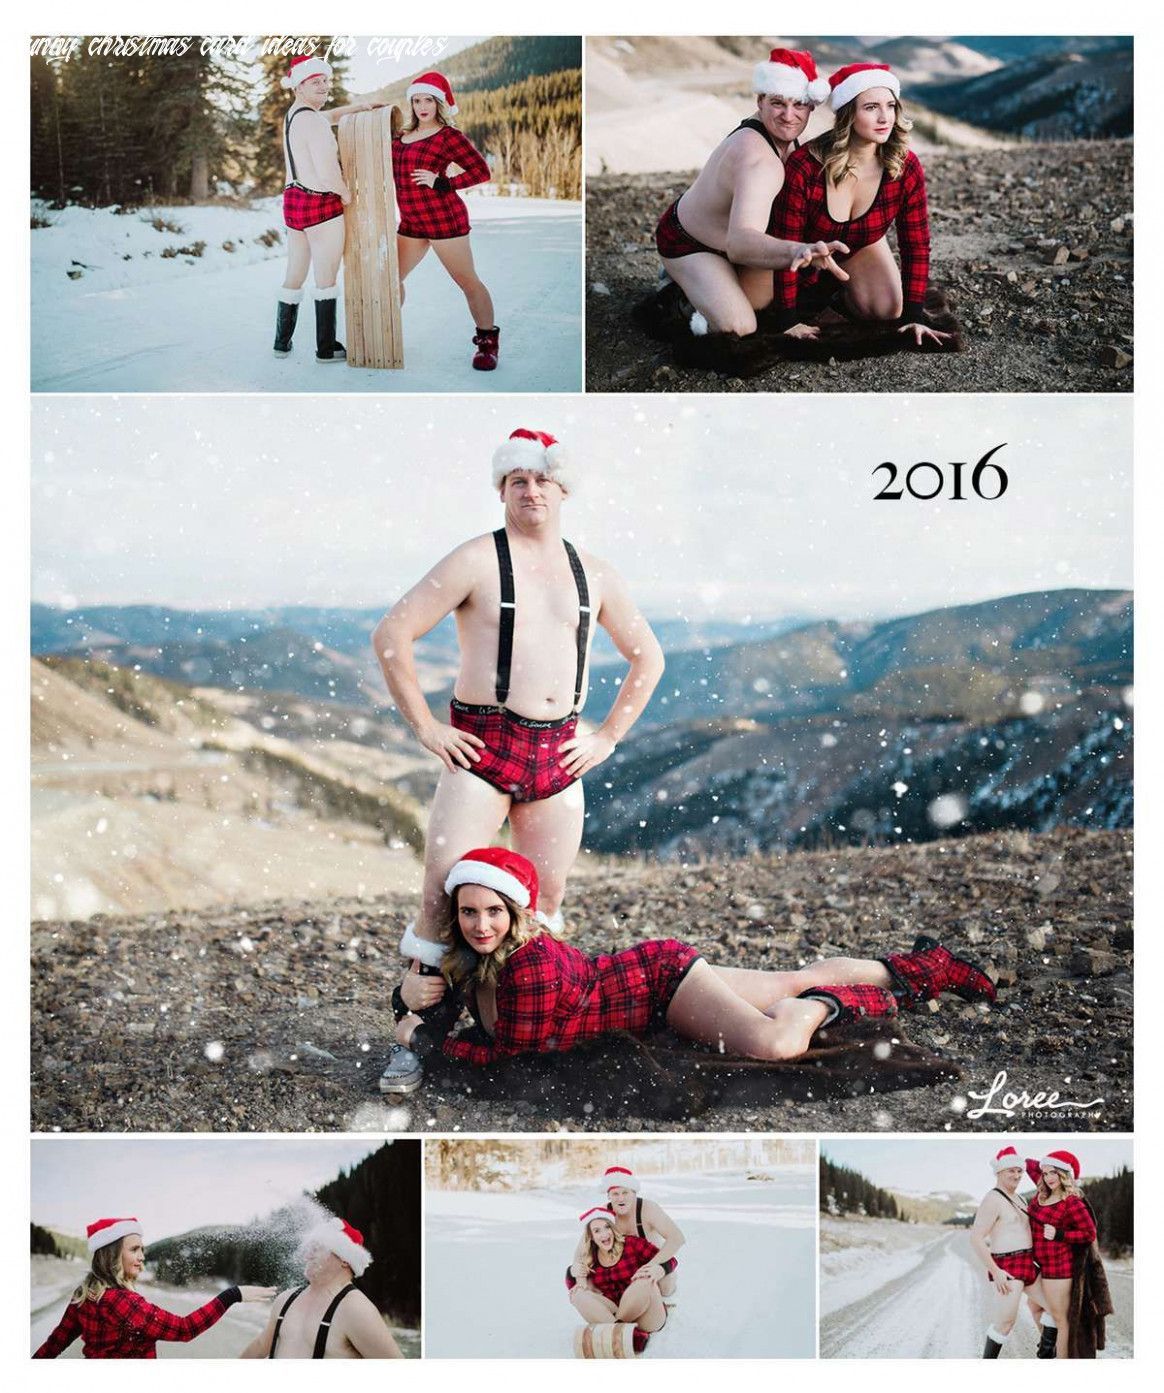 6 Funny Christmas Card Ideas For Couples - Card Making Ideas -